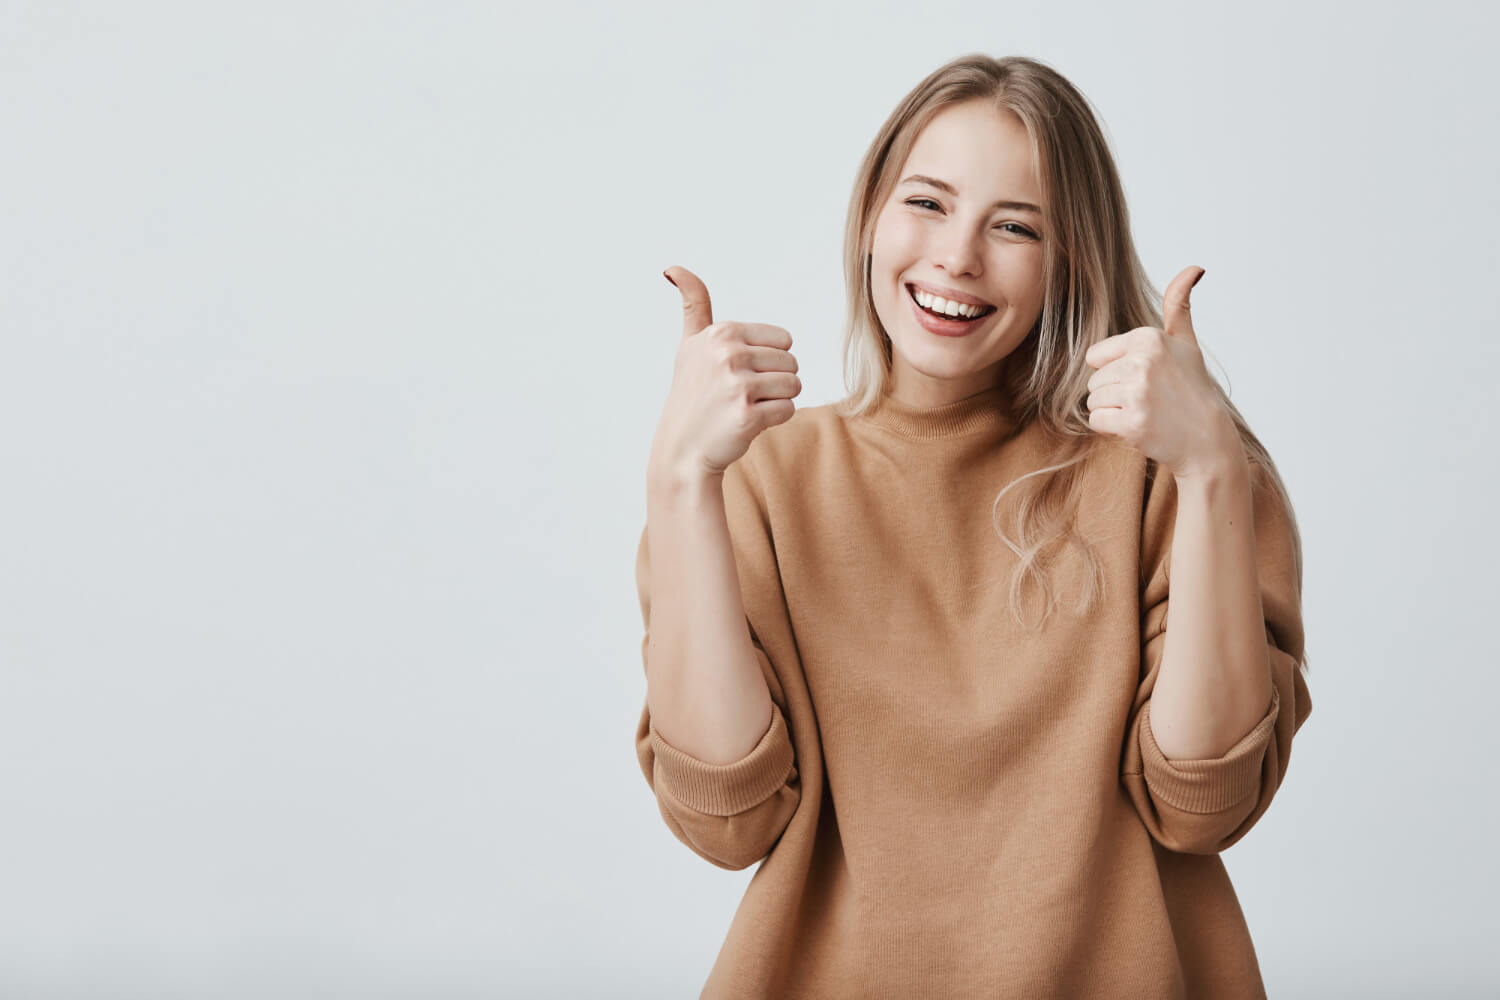 Young woman with broad smile thumbs up